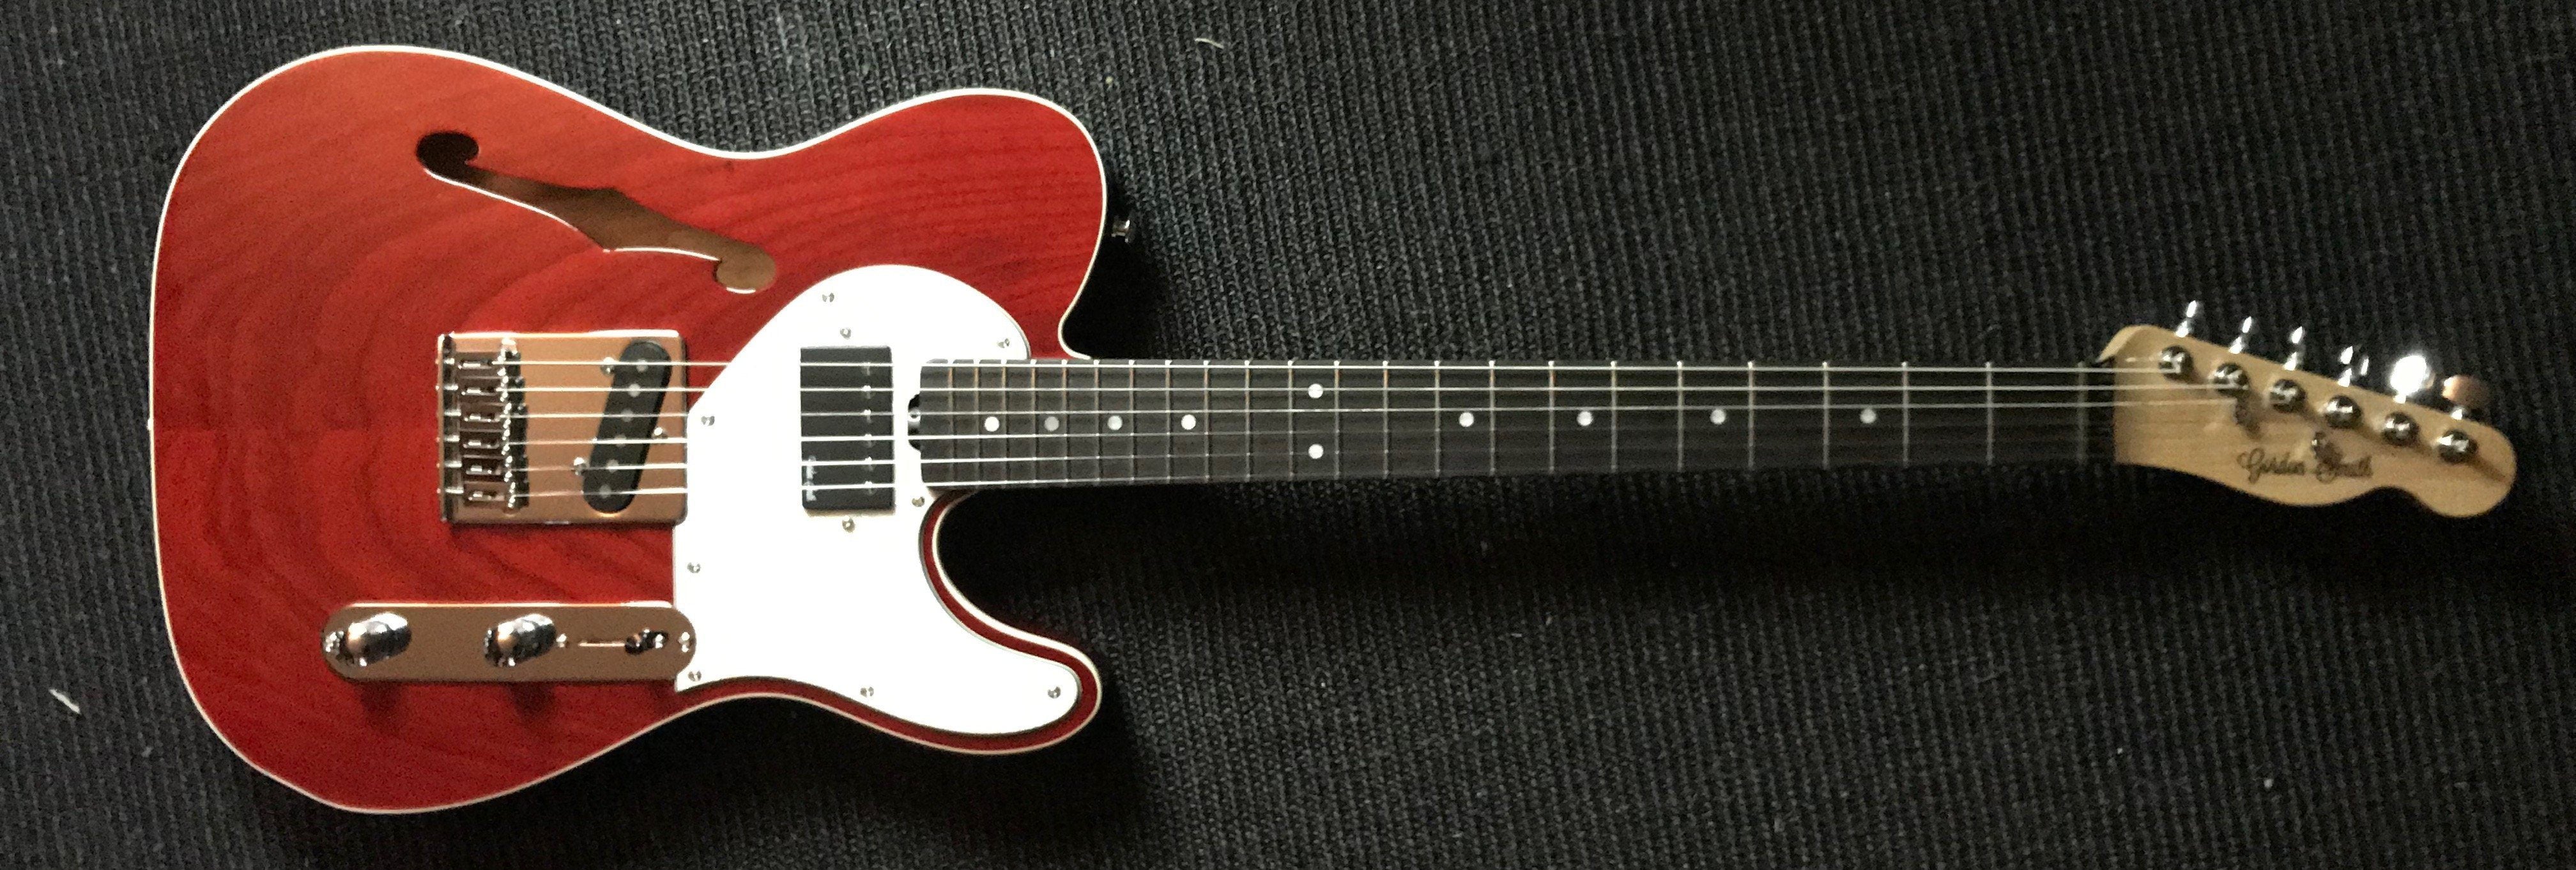 Gordon Smith Classic T HBS Semi Hollow Swamp Ash Bound Top Red, Electric Guitar for sale at Richards Guitars.